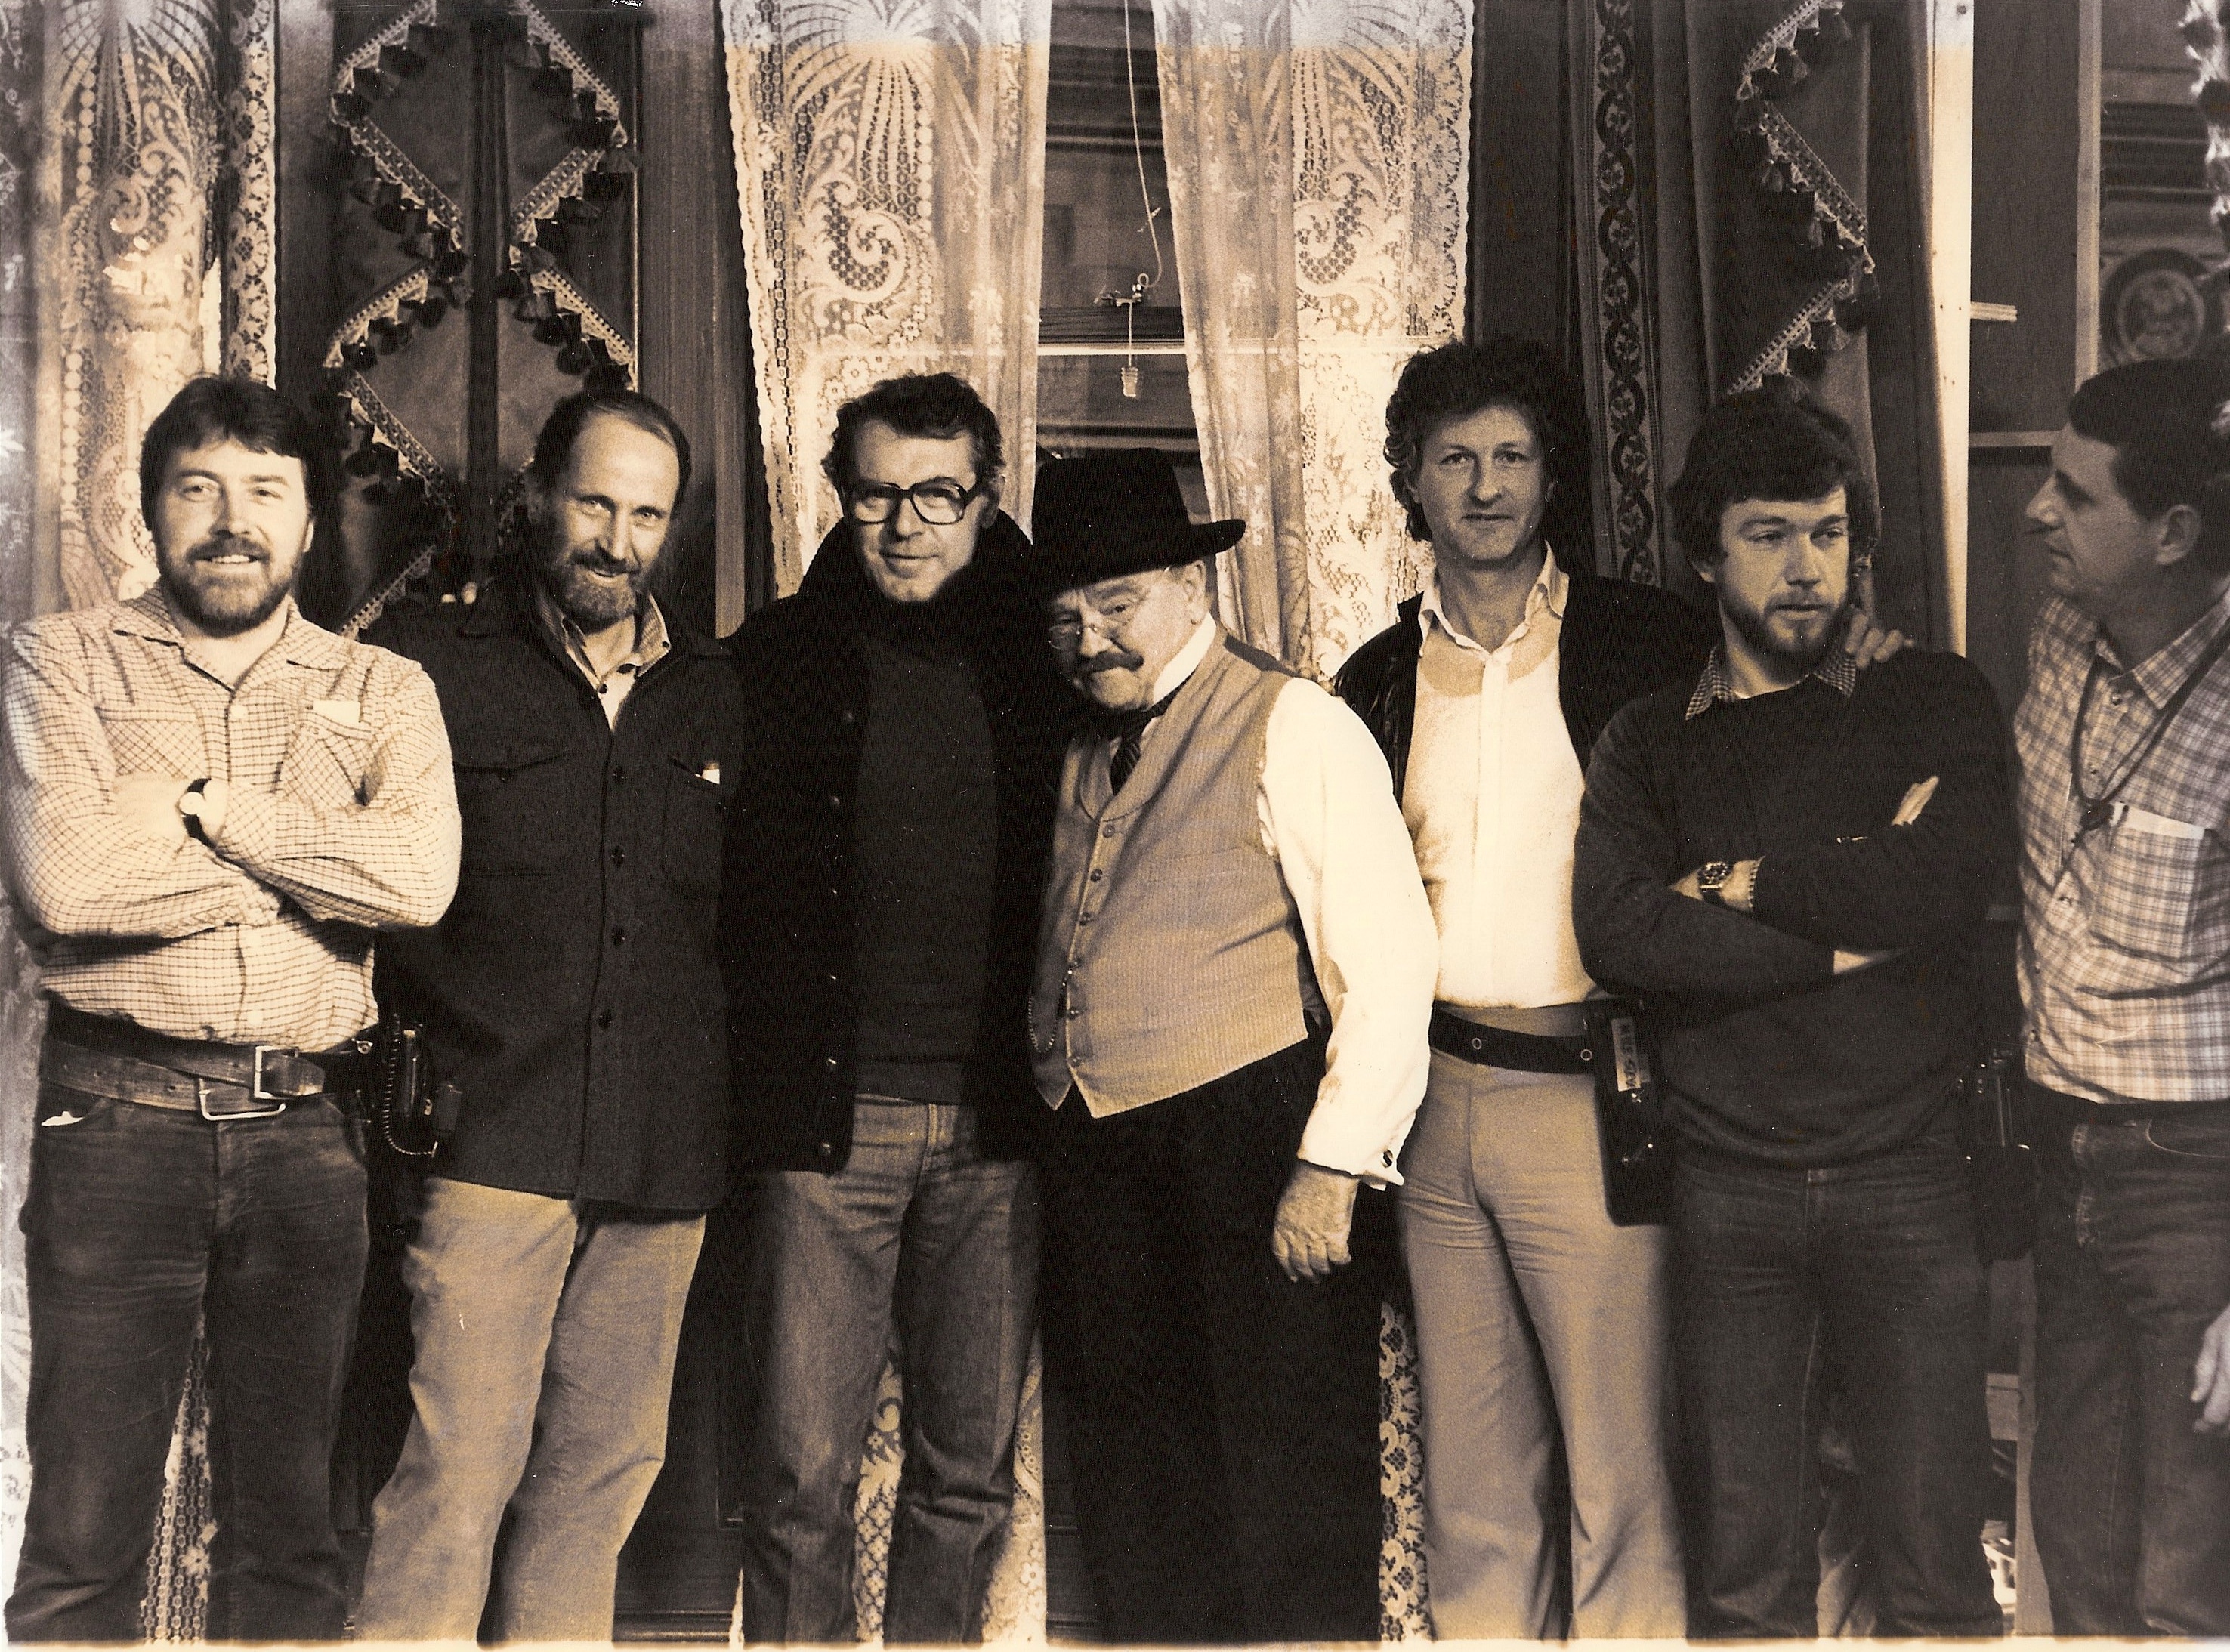 Ragtime 1979 With, From L to R, Ken Tuohy, Mike Hausman, Milos Foreman, James Cagney, Michael Stephenson, Dick Quinlan.